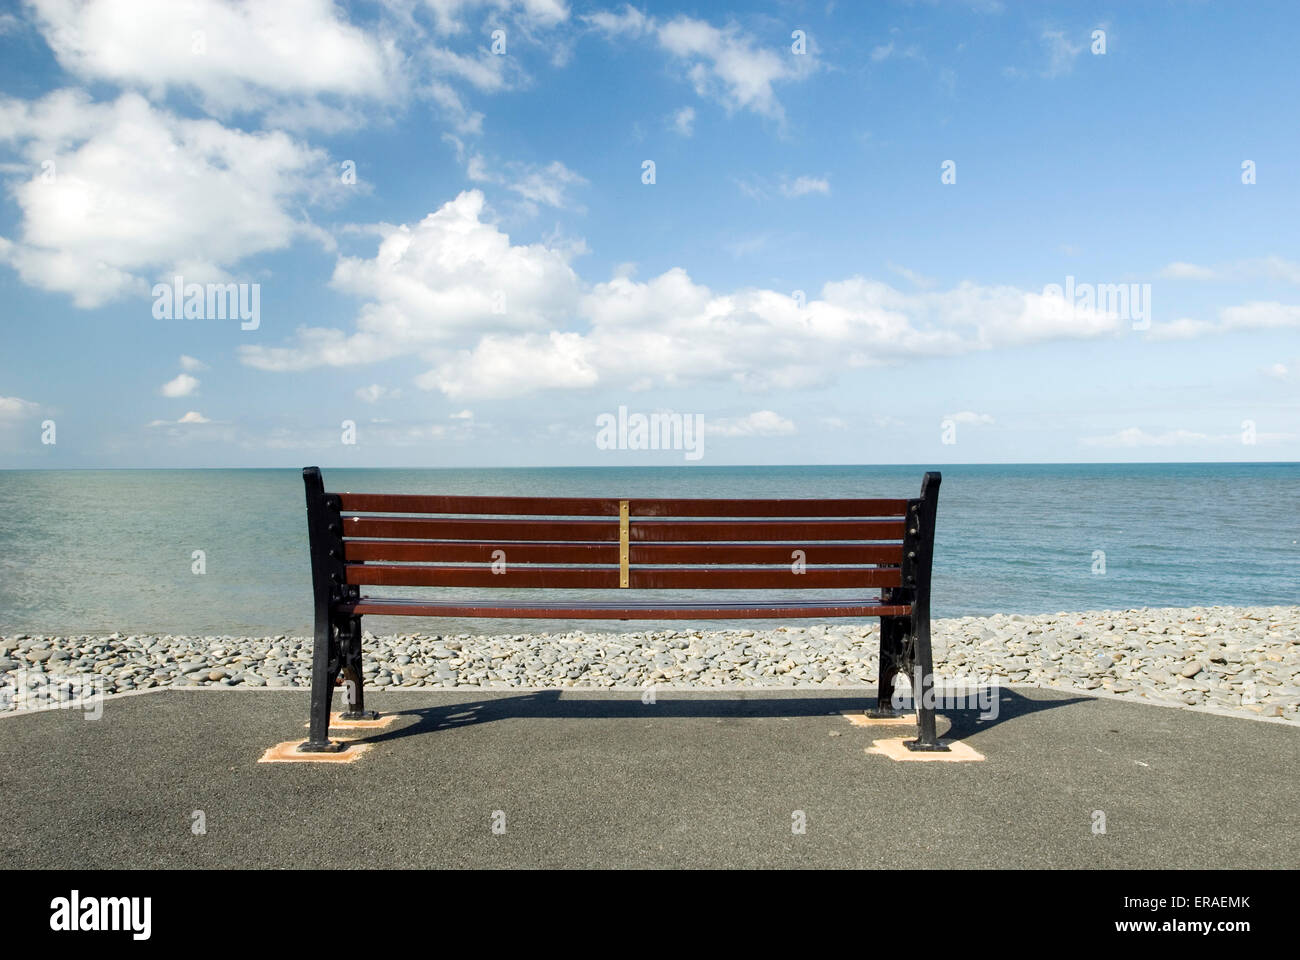 Bench at the sea, no people Stock Photo